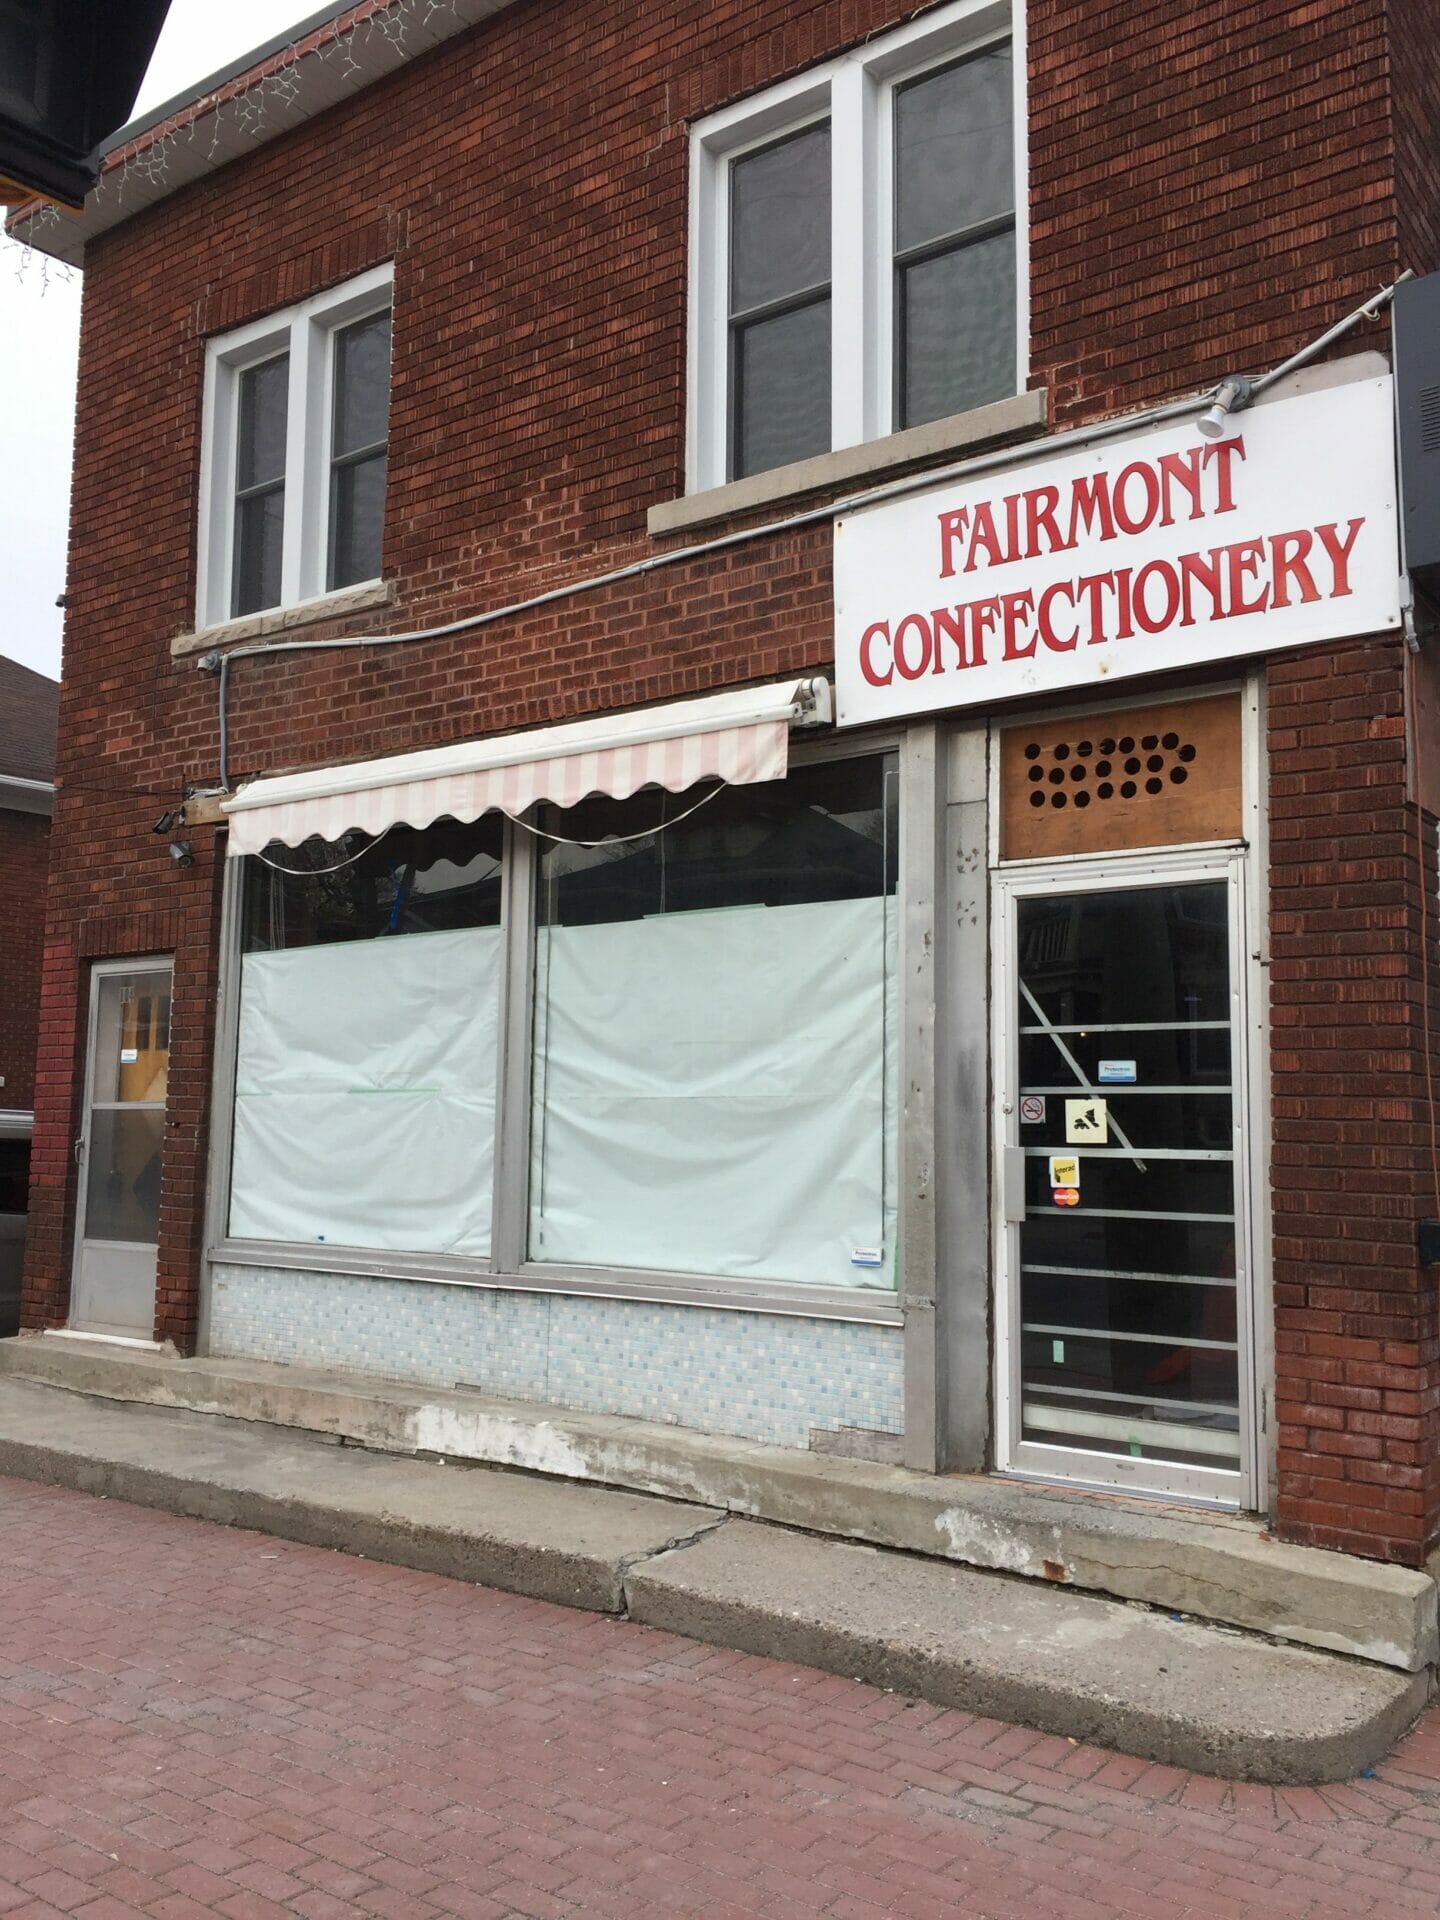 The exterior of the Fairmont Confectionary - soon to be the new home of The Merry Dairy frozen custard ice cream and handmade frozen treats.